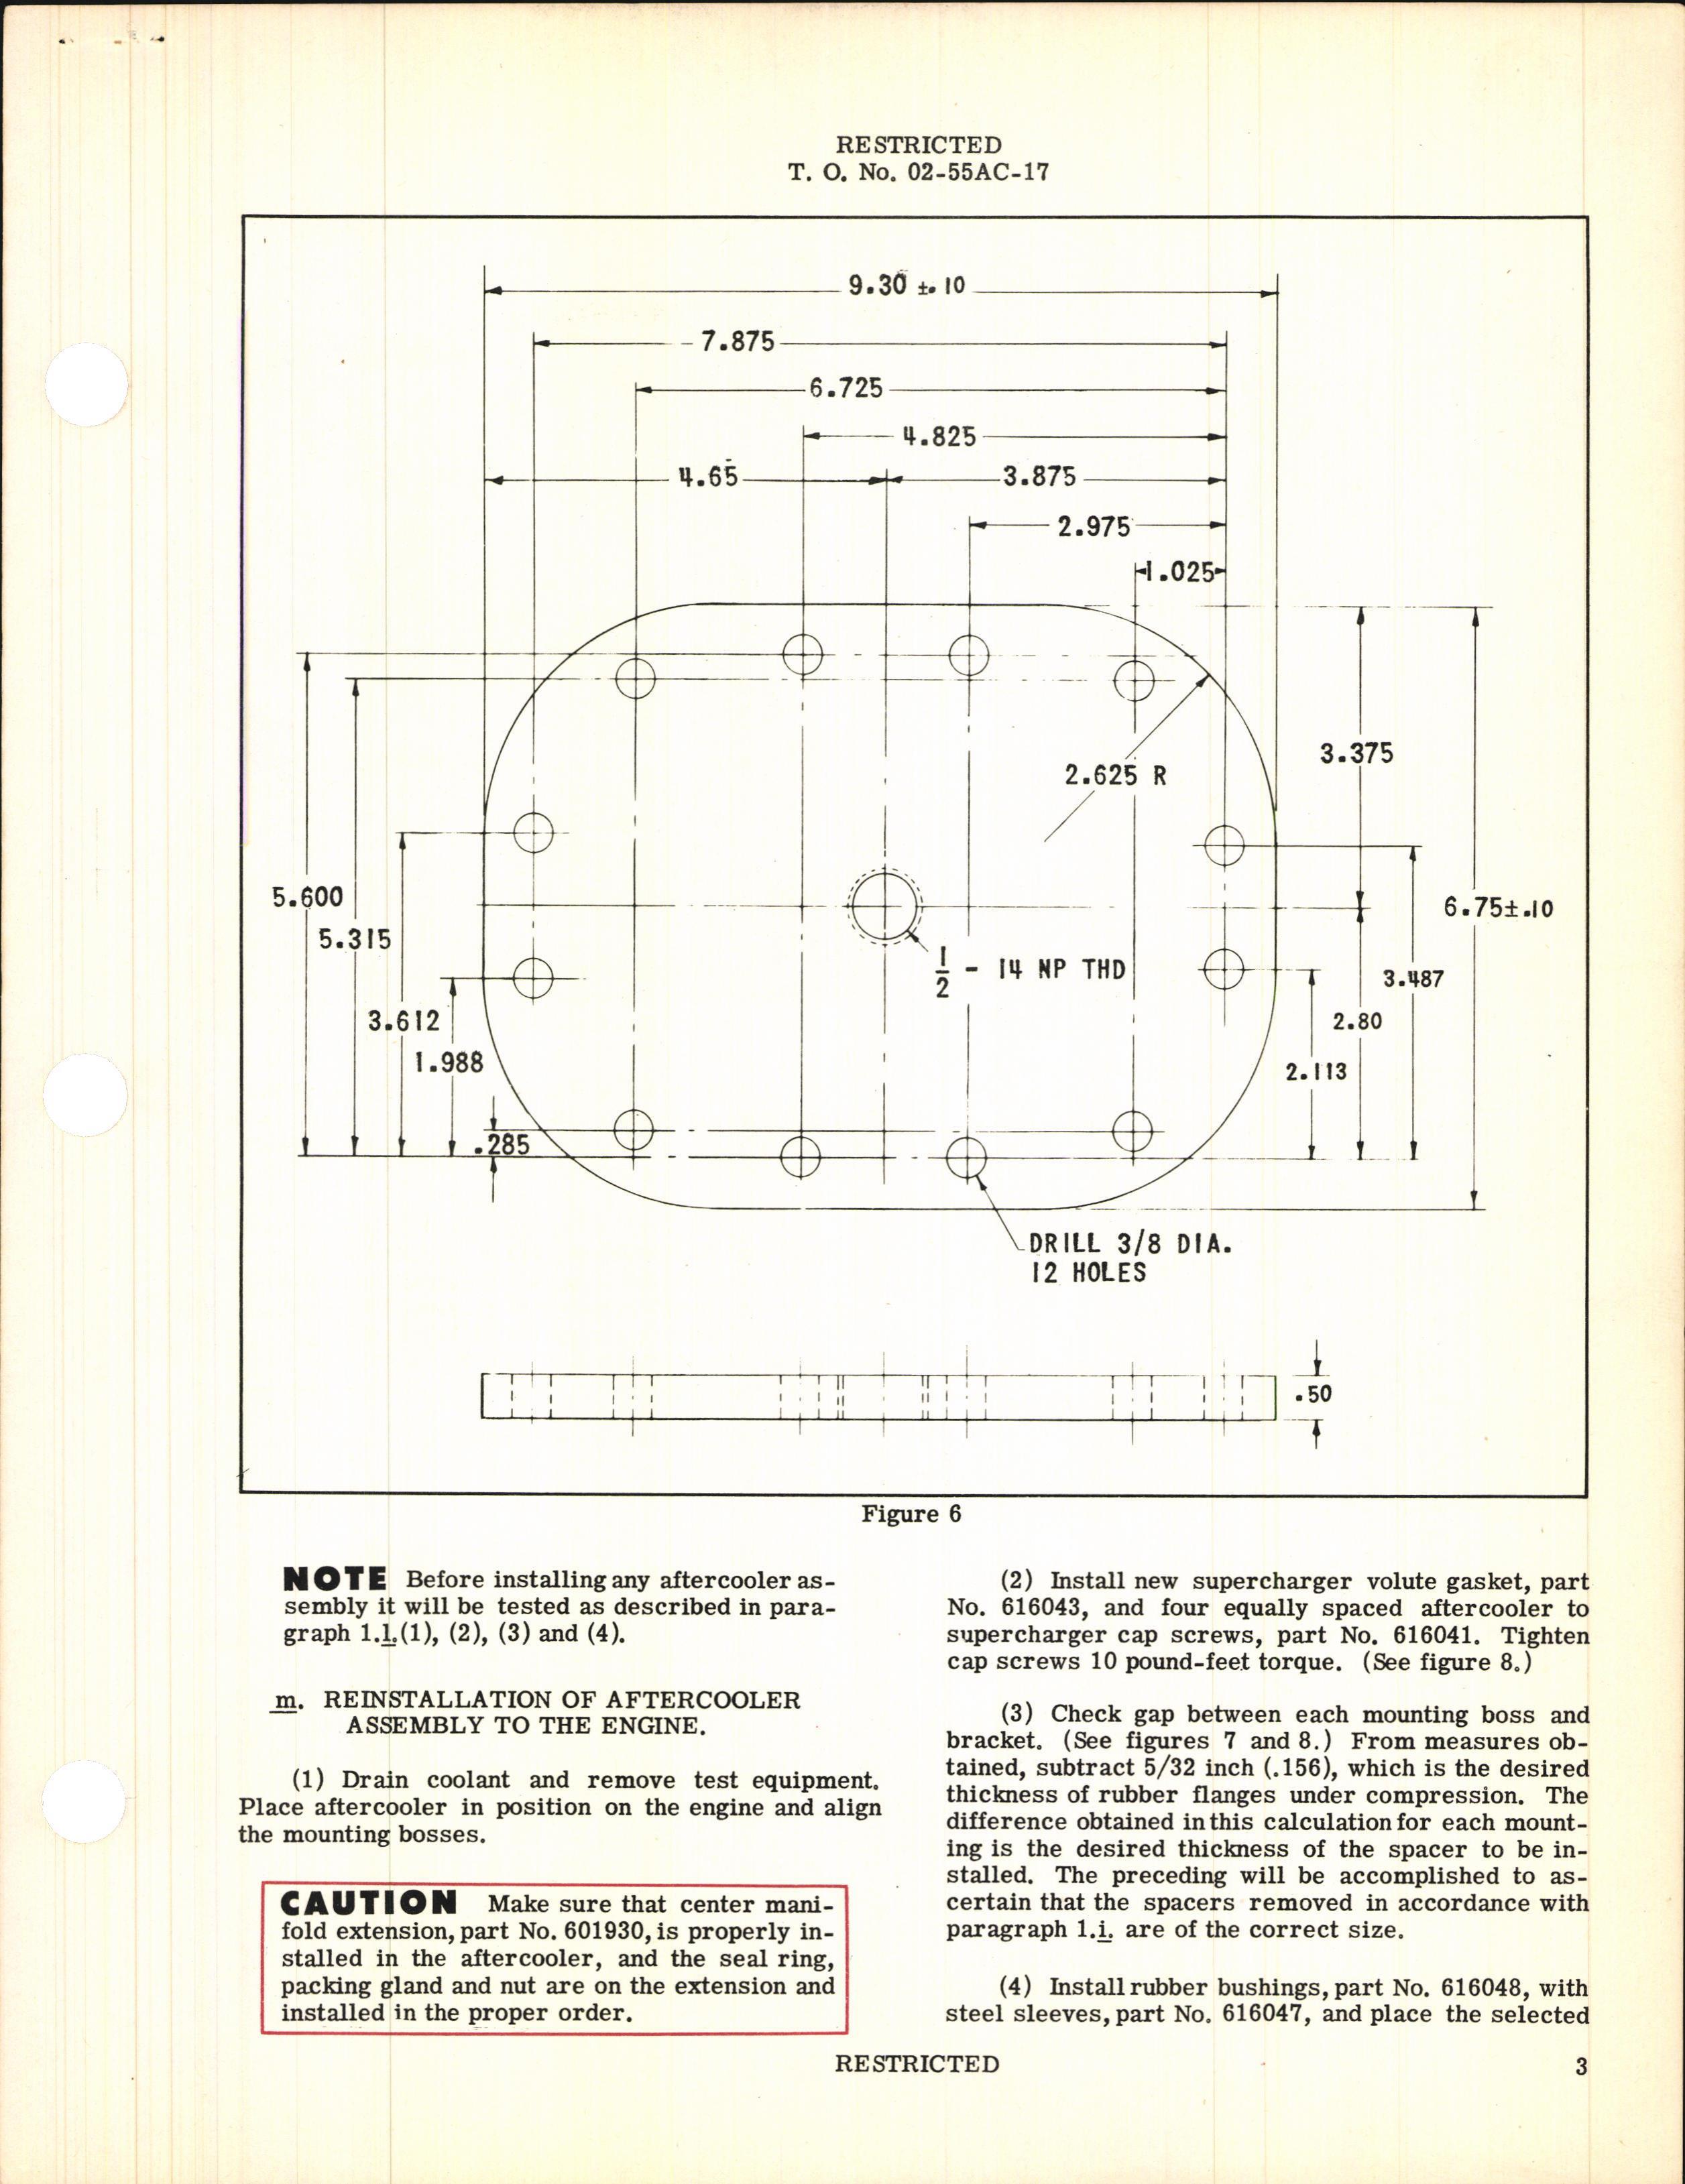 Sample page 3 from AirCorps Library document: Aftercooler Overhaul Procedure and Replacement of Aftercooler Assemblies for V-1650-3 and -7